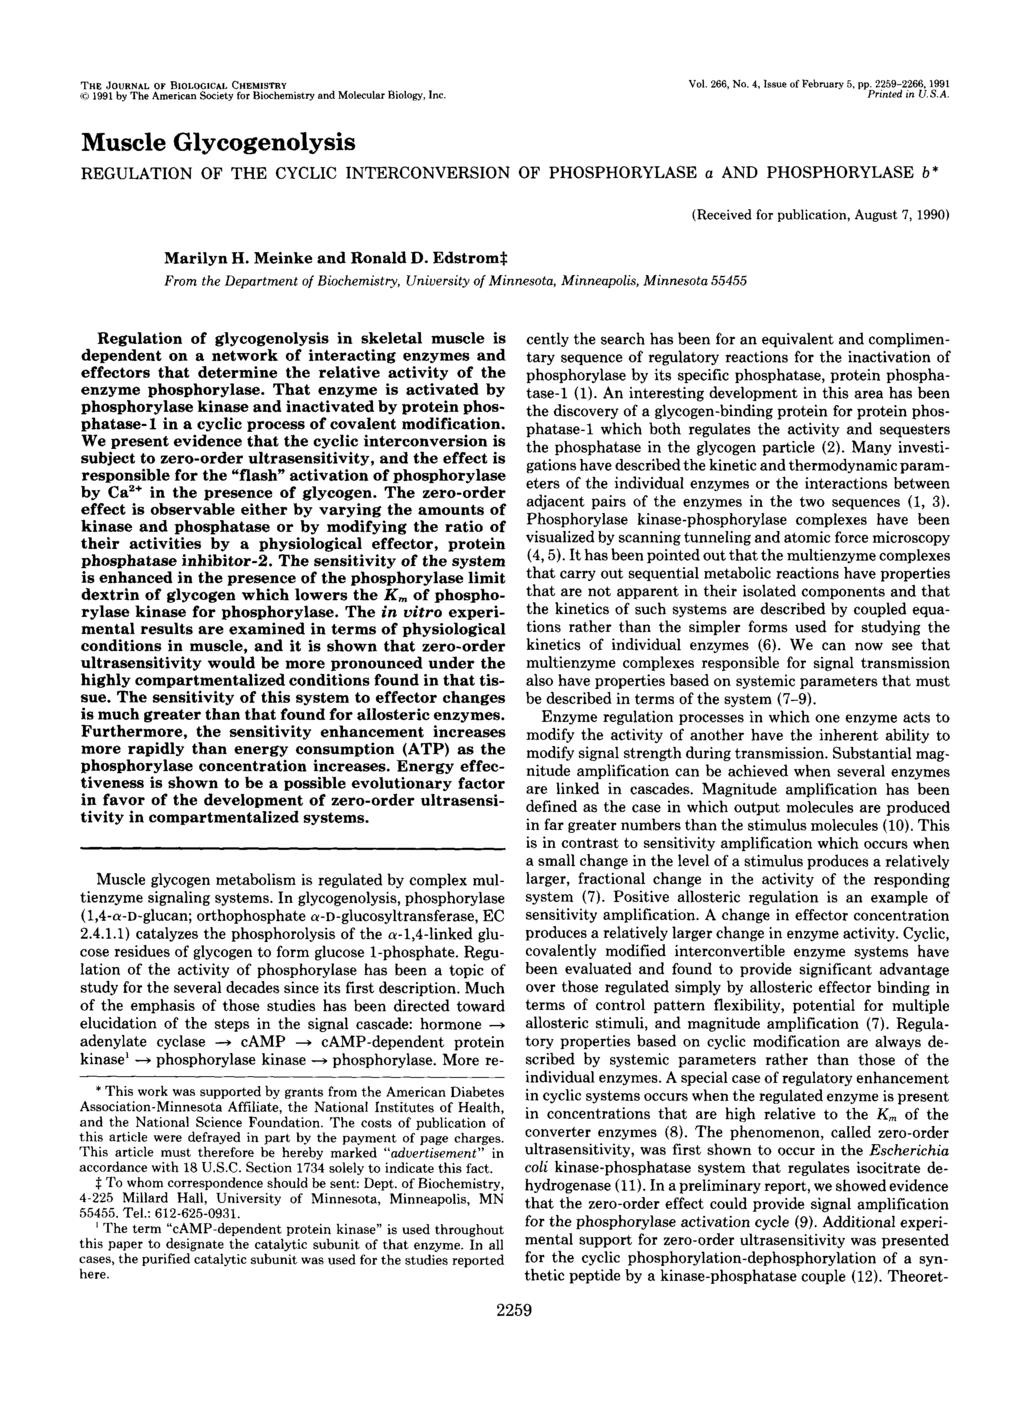 THE JOURNAL OF BIOLOGICAL CHEMISTRY (0 1991 by The Am